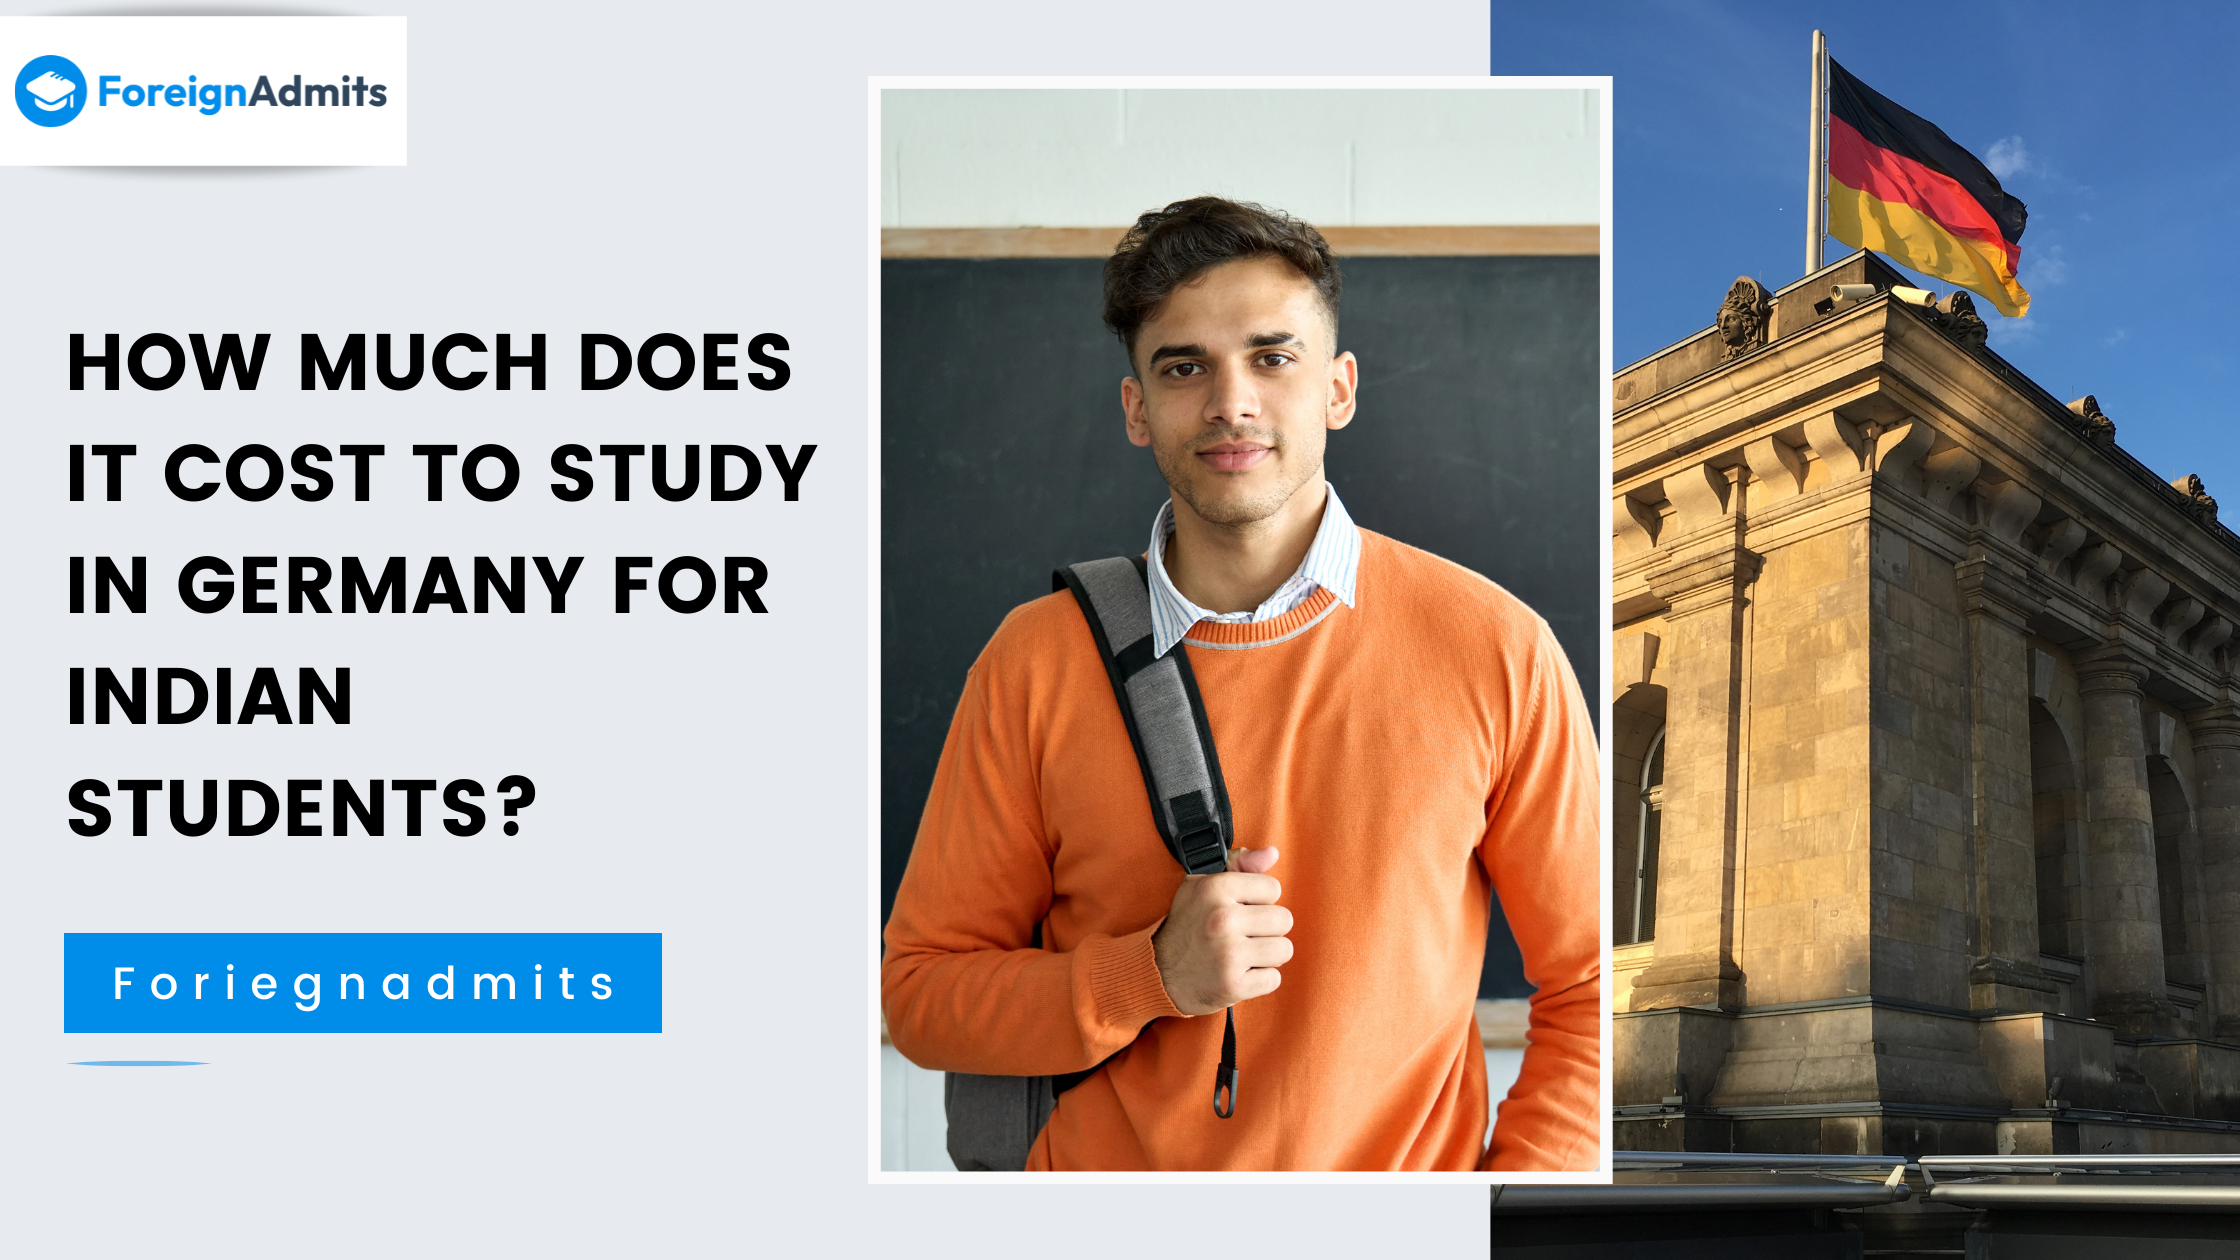 How much does it cost to study in Germany for Indian students?